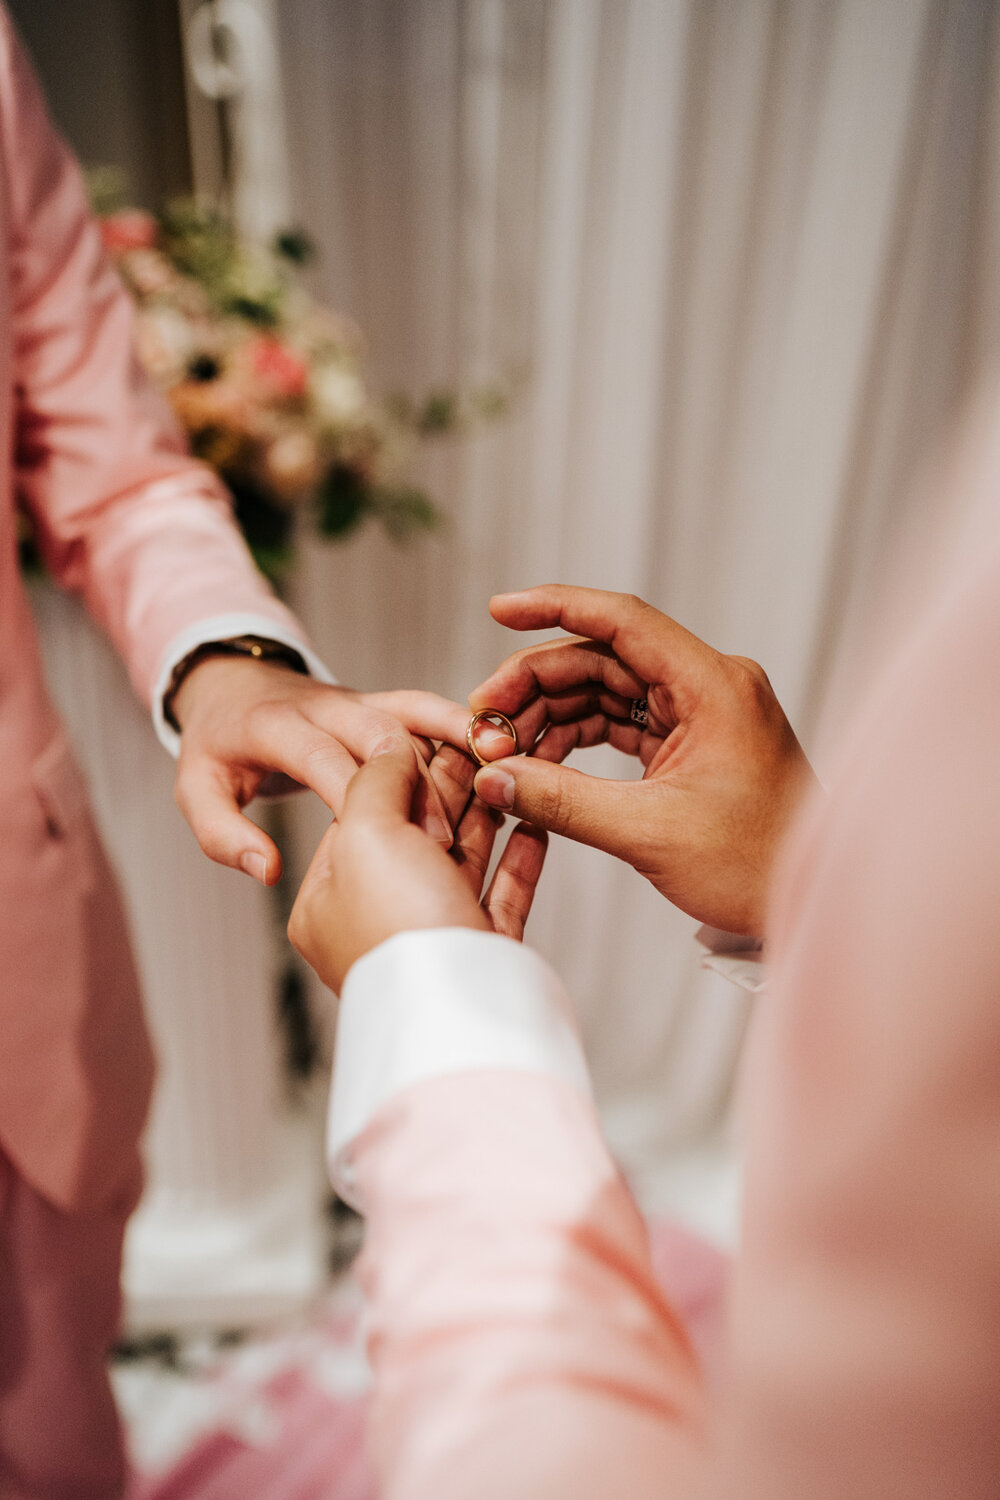  One of the grooms placing the wedding band on the other groom's finger 